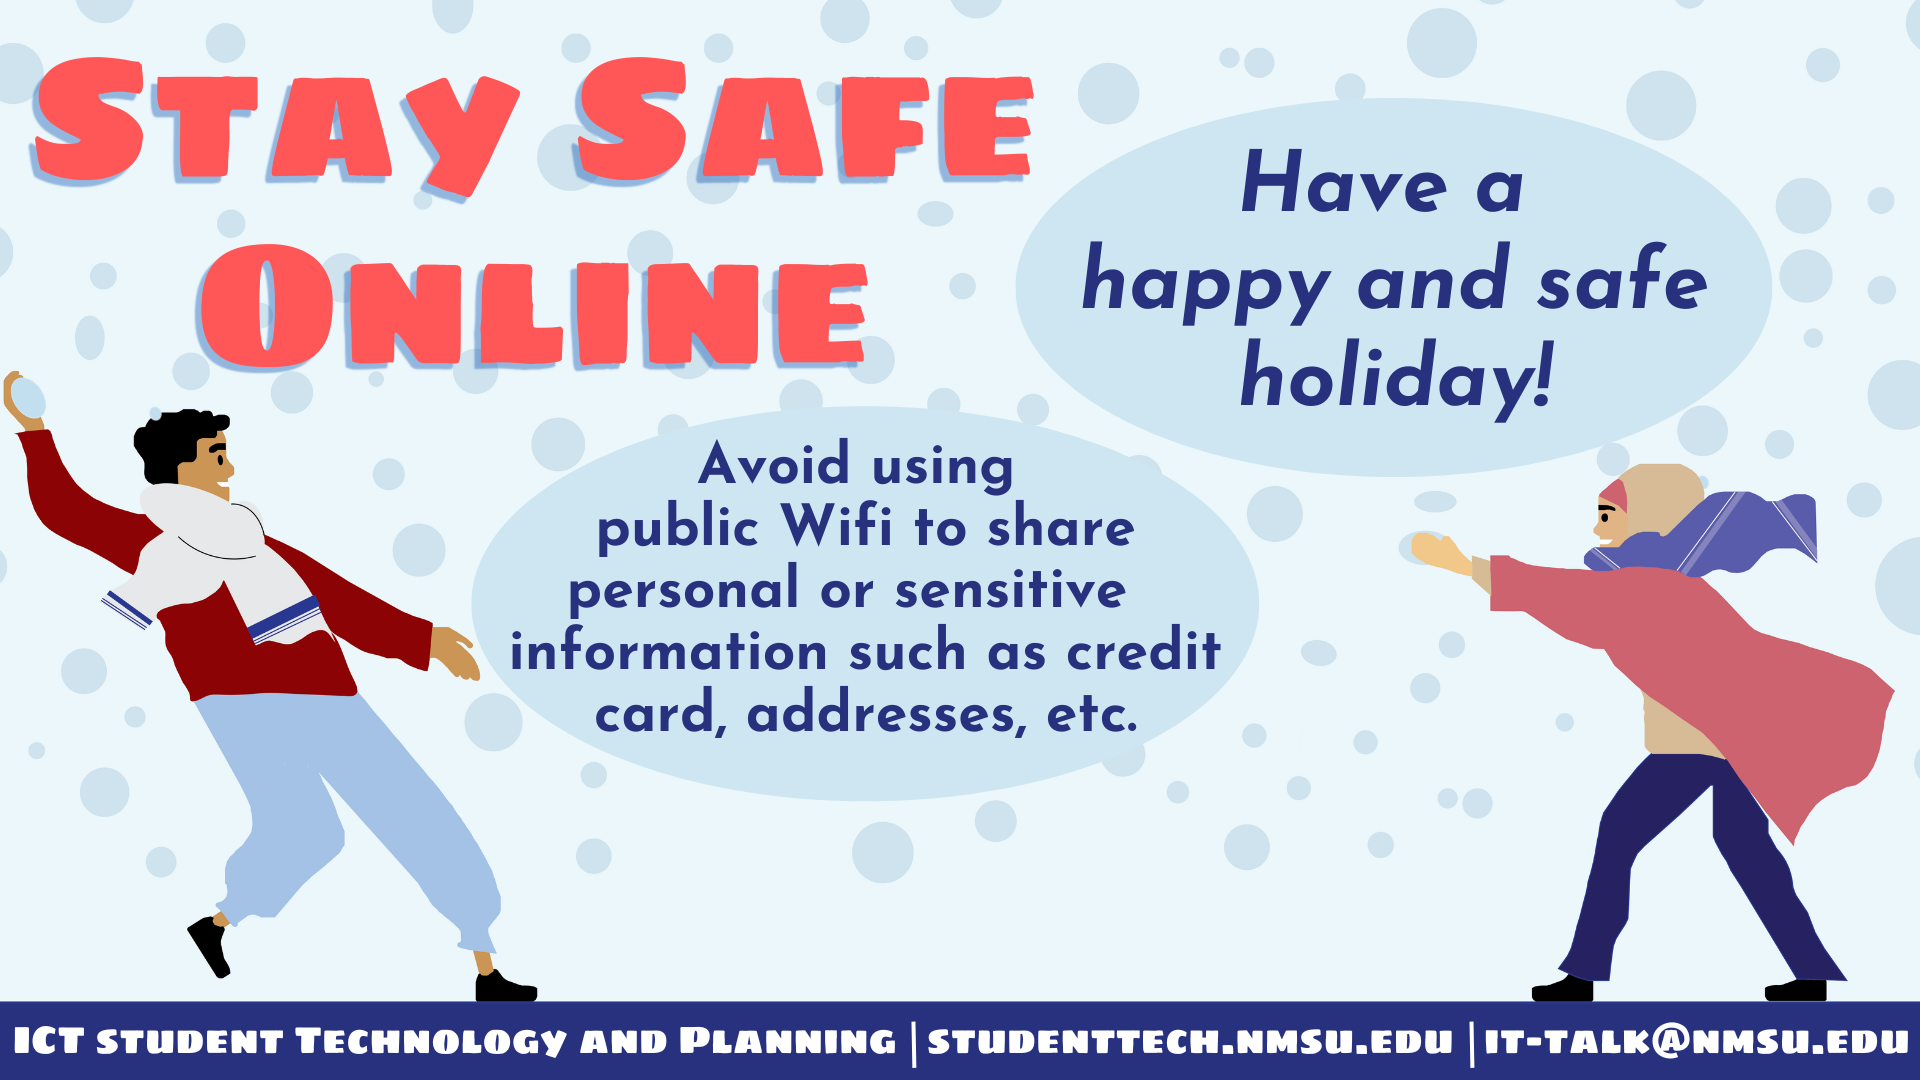 Stay safe online. Avoid using public WiFi to share personal or sensitive information such as credit cards, addresses, etc.